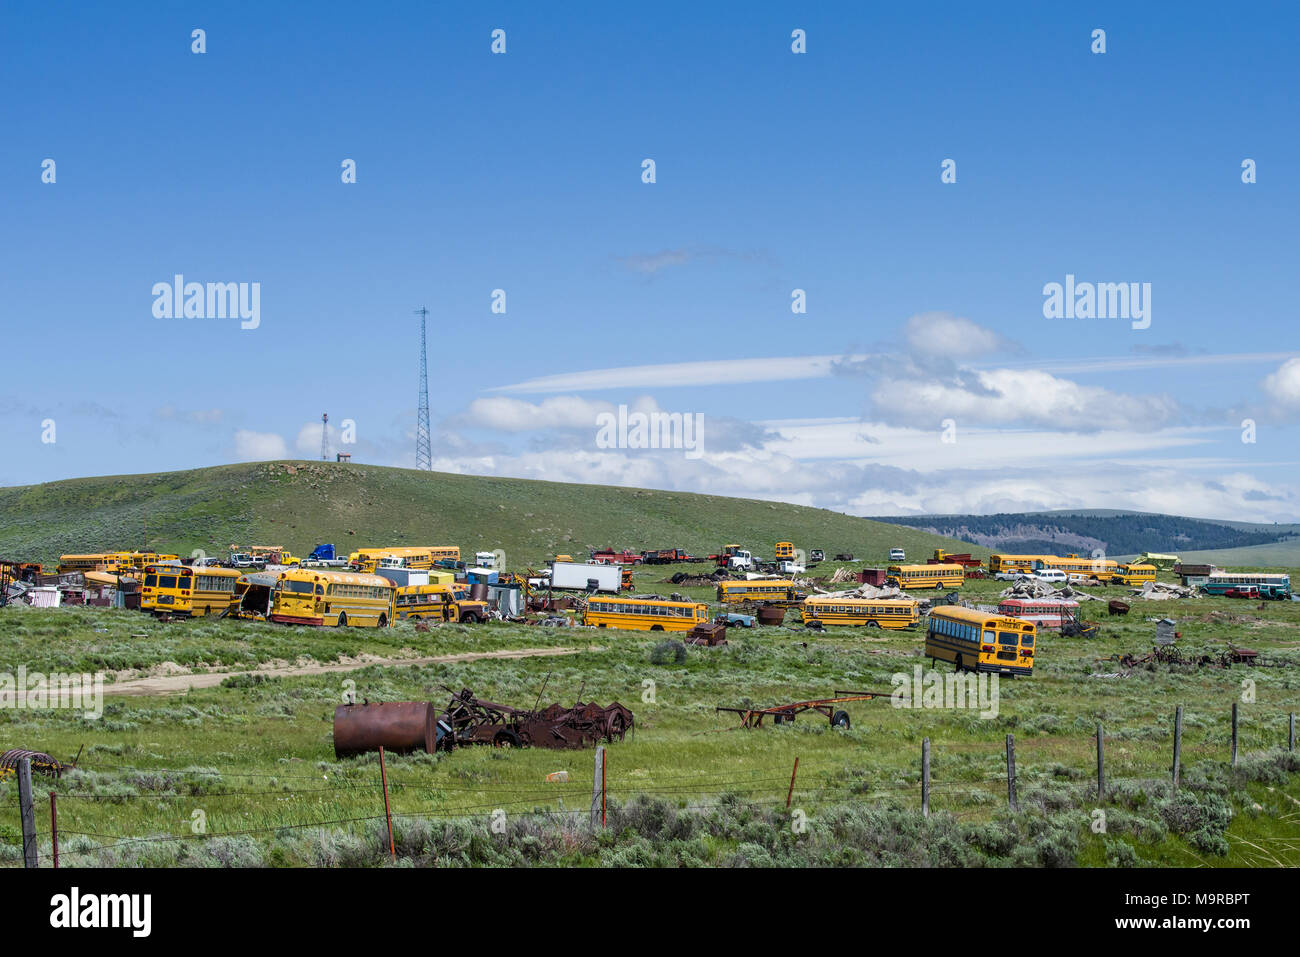 Junk yard of yellow school buses waiting to be scrapped for parts Stock Photo